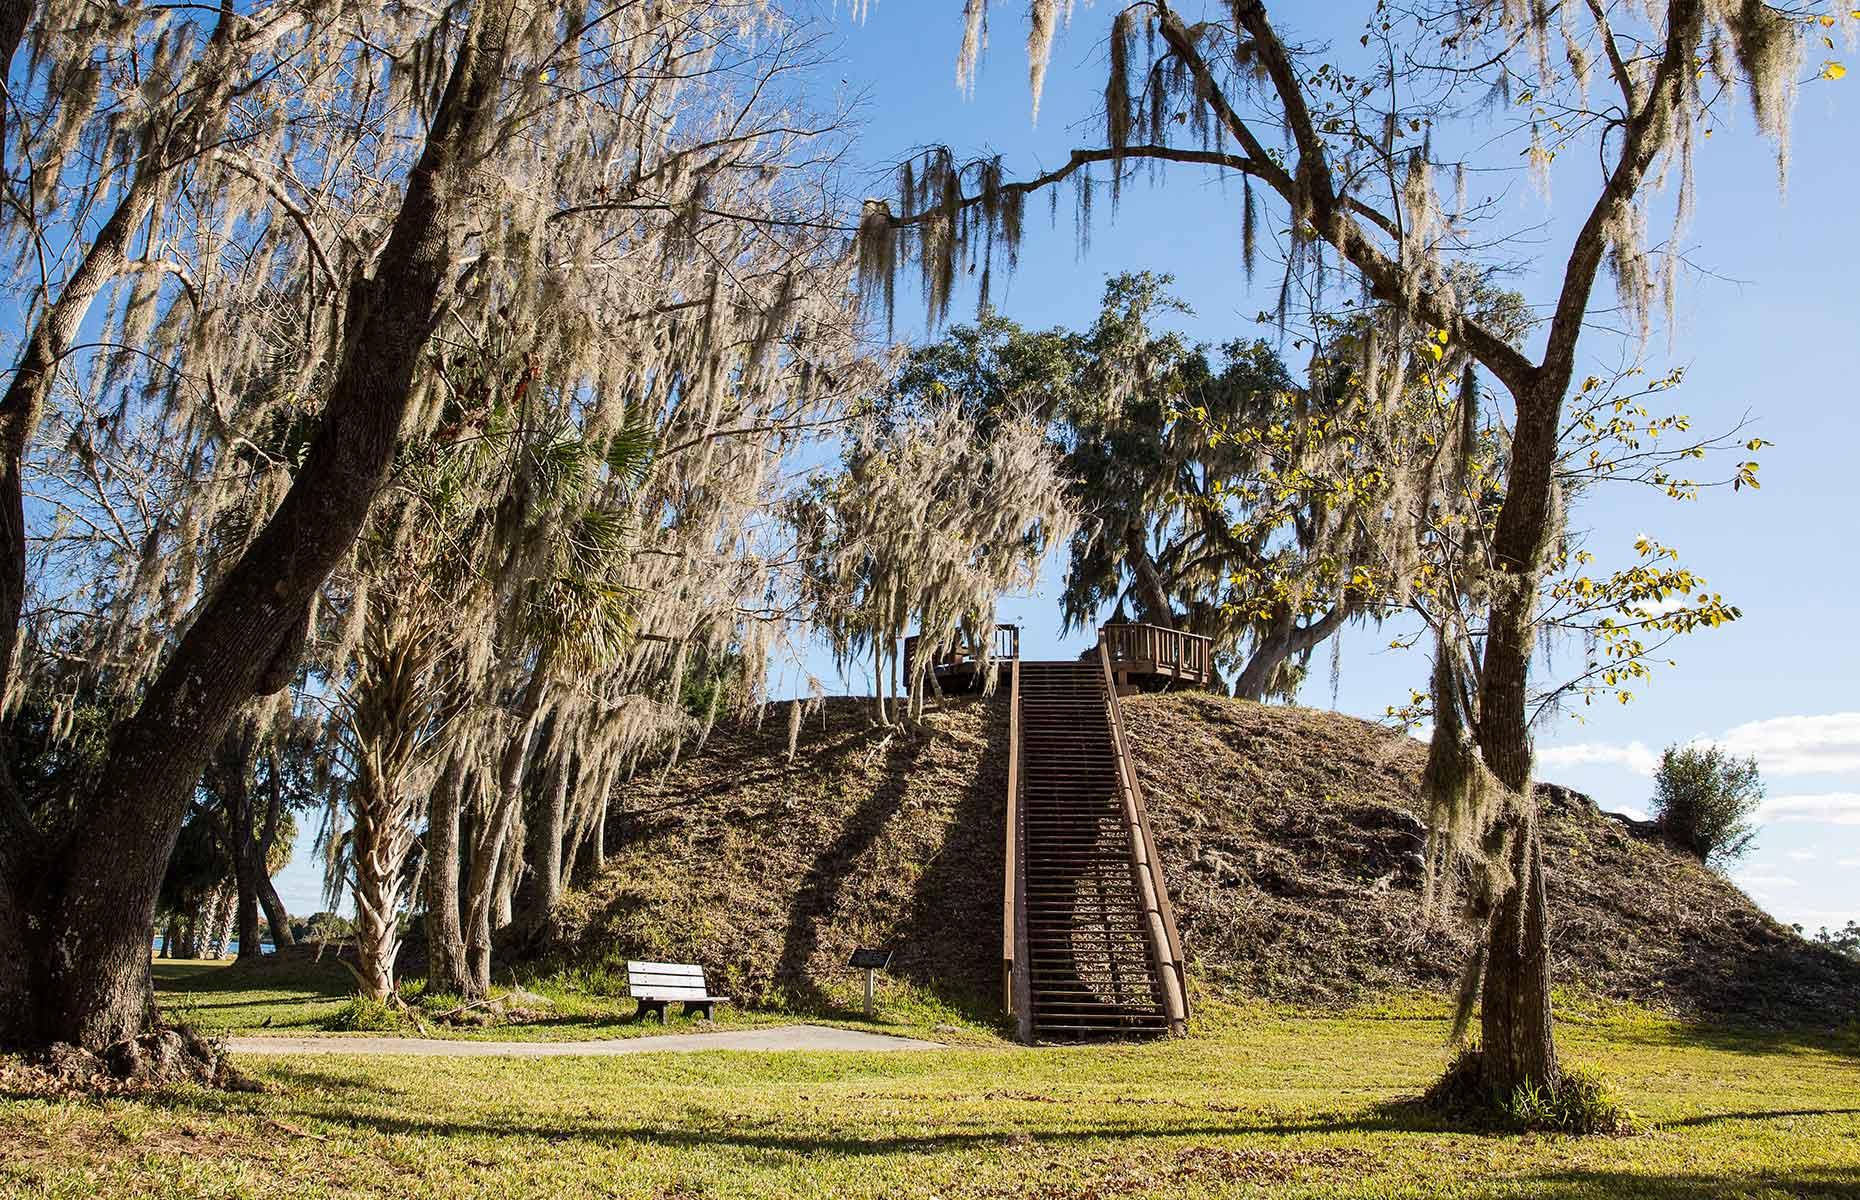 <p>The incredible <a href="https://www.floridastateparks.org/parks-and-trails/crystal-river-archaeological-state-park">Crystal River Archaeological State Park</a> boasts Native American burial mounds, temple mounds, a plaza area, a village and a shell midden (rubbish heap). The site is believed to date back as far as <a href="https://www.discovercrystalriverfl.com/events/moon-over-the-mounds-7/">1000 BC</a>, with the largest mound, Mound A (pictured), being built around AD 600 out of foraged oyster shells for a high-ranking member of the community. As well as exploring the museum and interpretive exhibits, you can ascend the <a href="http://floridanaturecoast.org/County/Citrus/CrystalRiverArchaeological/CrystalRiverArchaeological">'Stairway to Heaven'</a> of Mound A.</p>